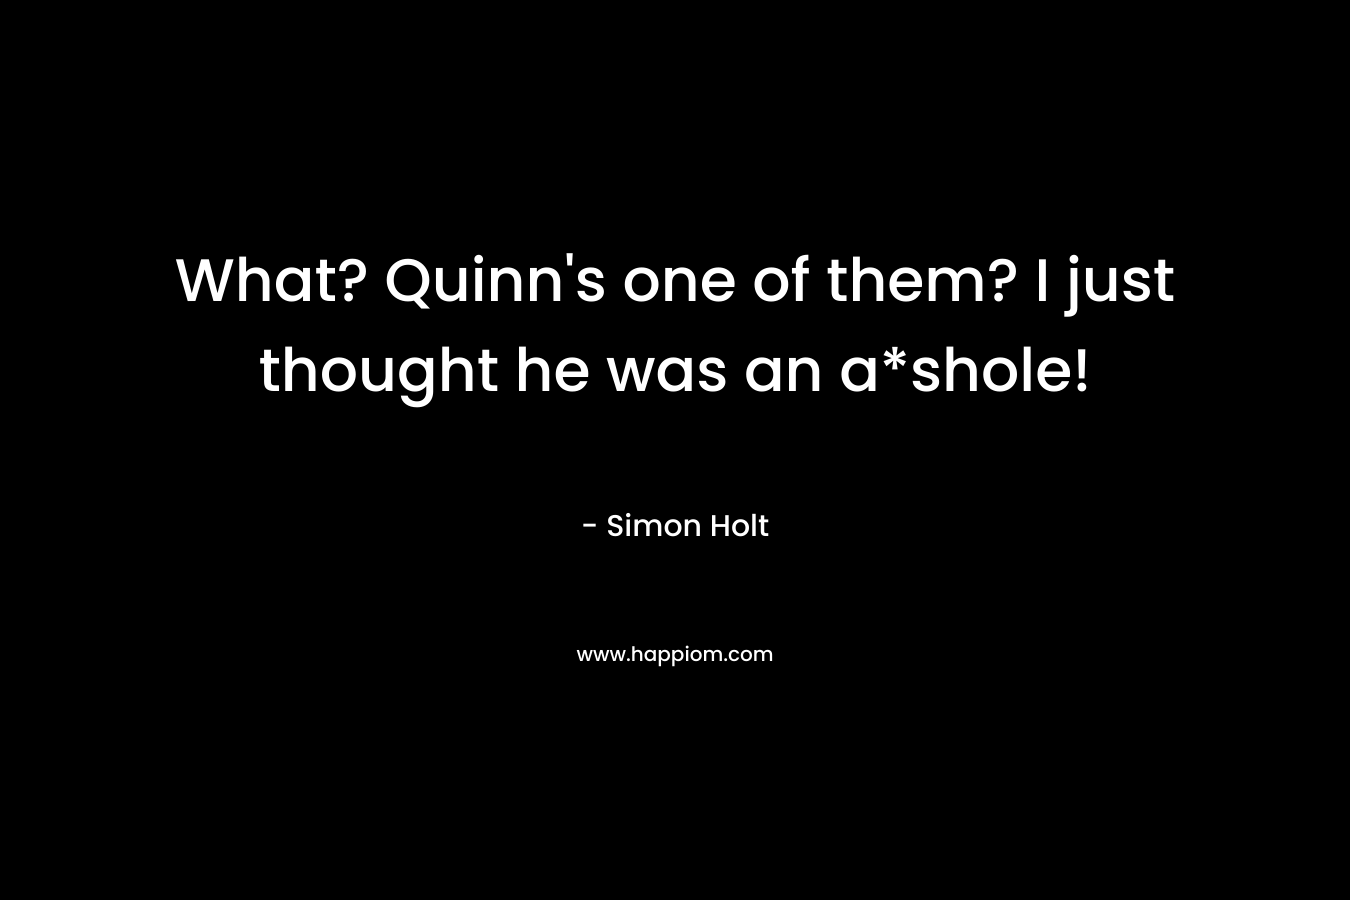 What? Quinn's one of them? I just thought he was an a*shole!